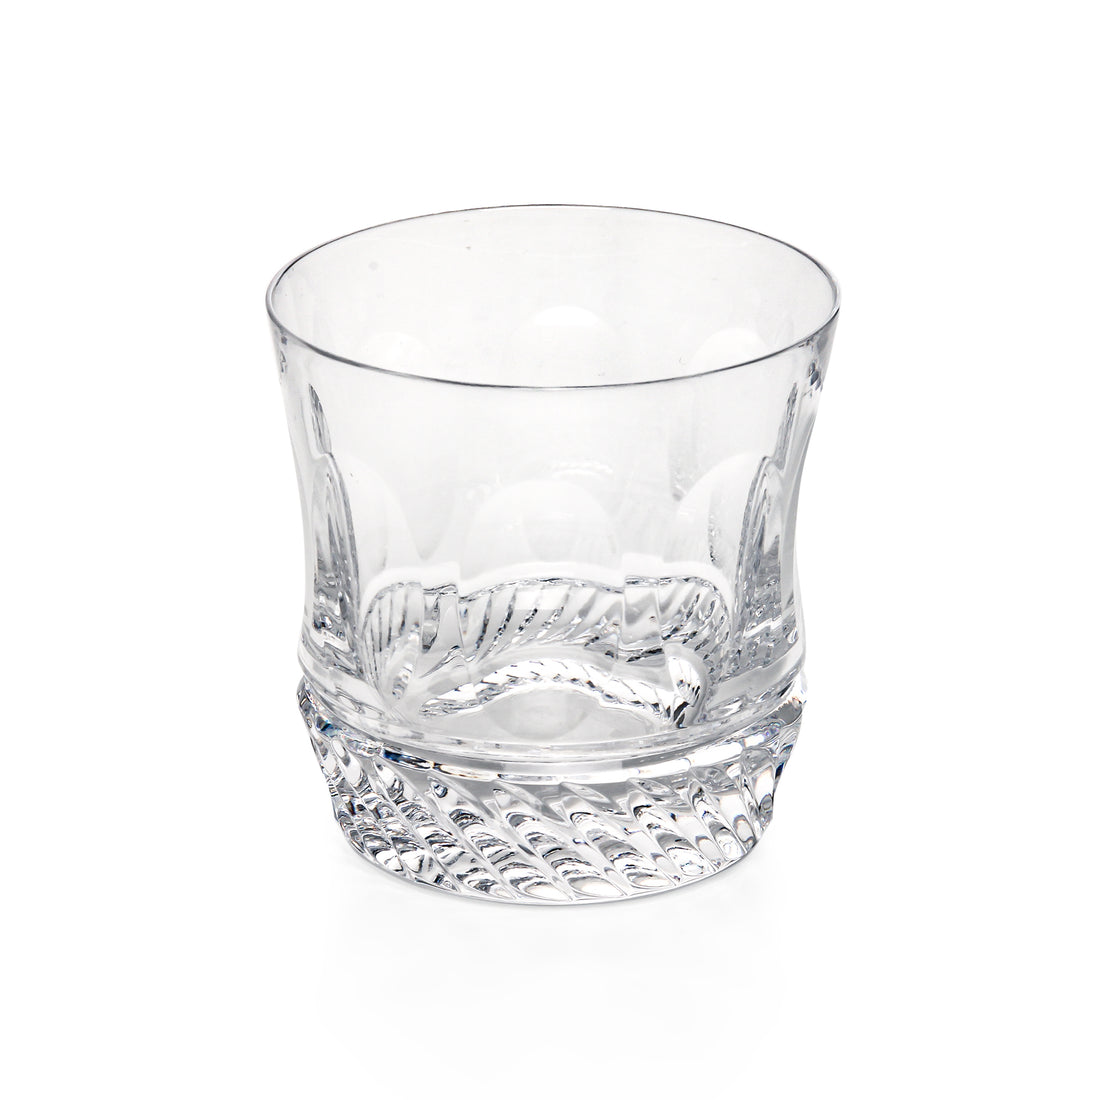 VILLEROY & BOCH Imperial Double Old Fashioned Glasses - Set of 5